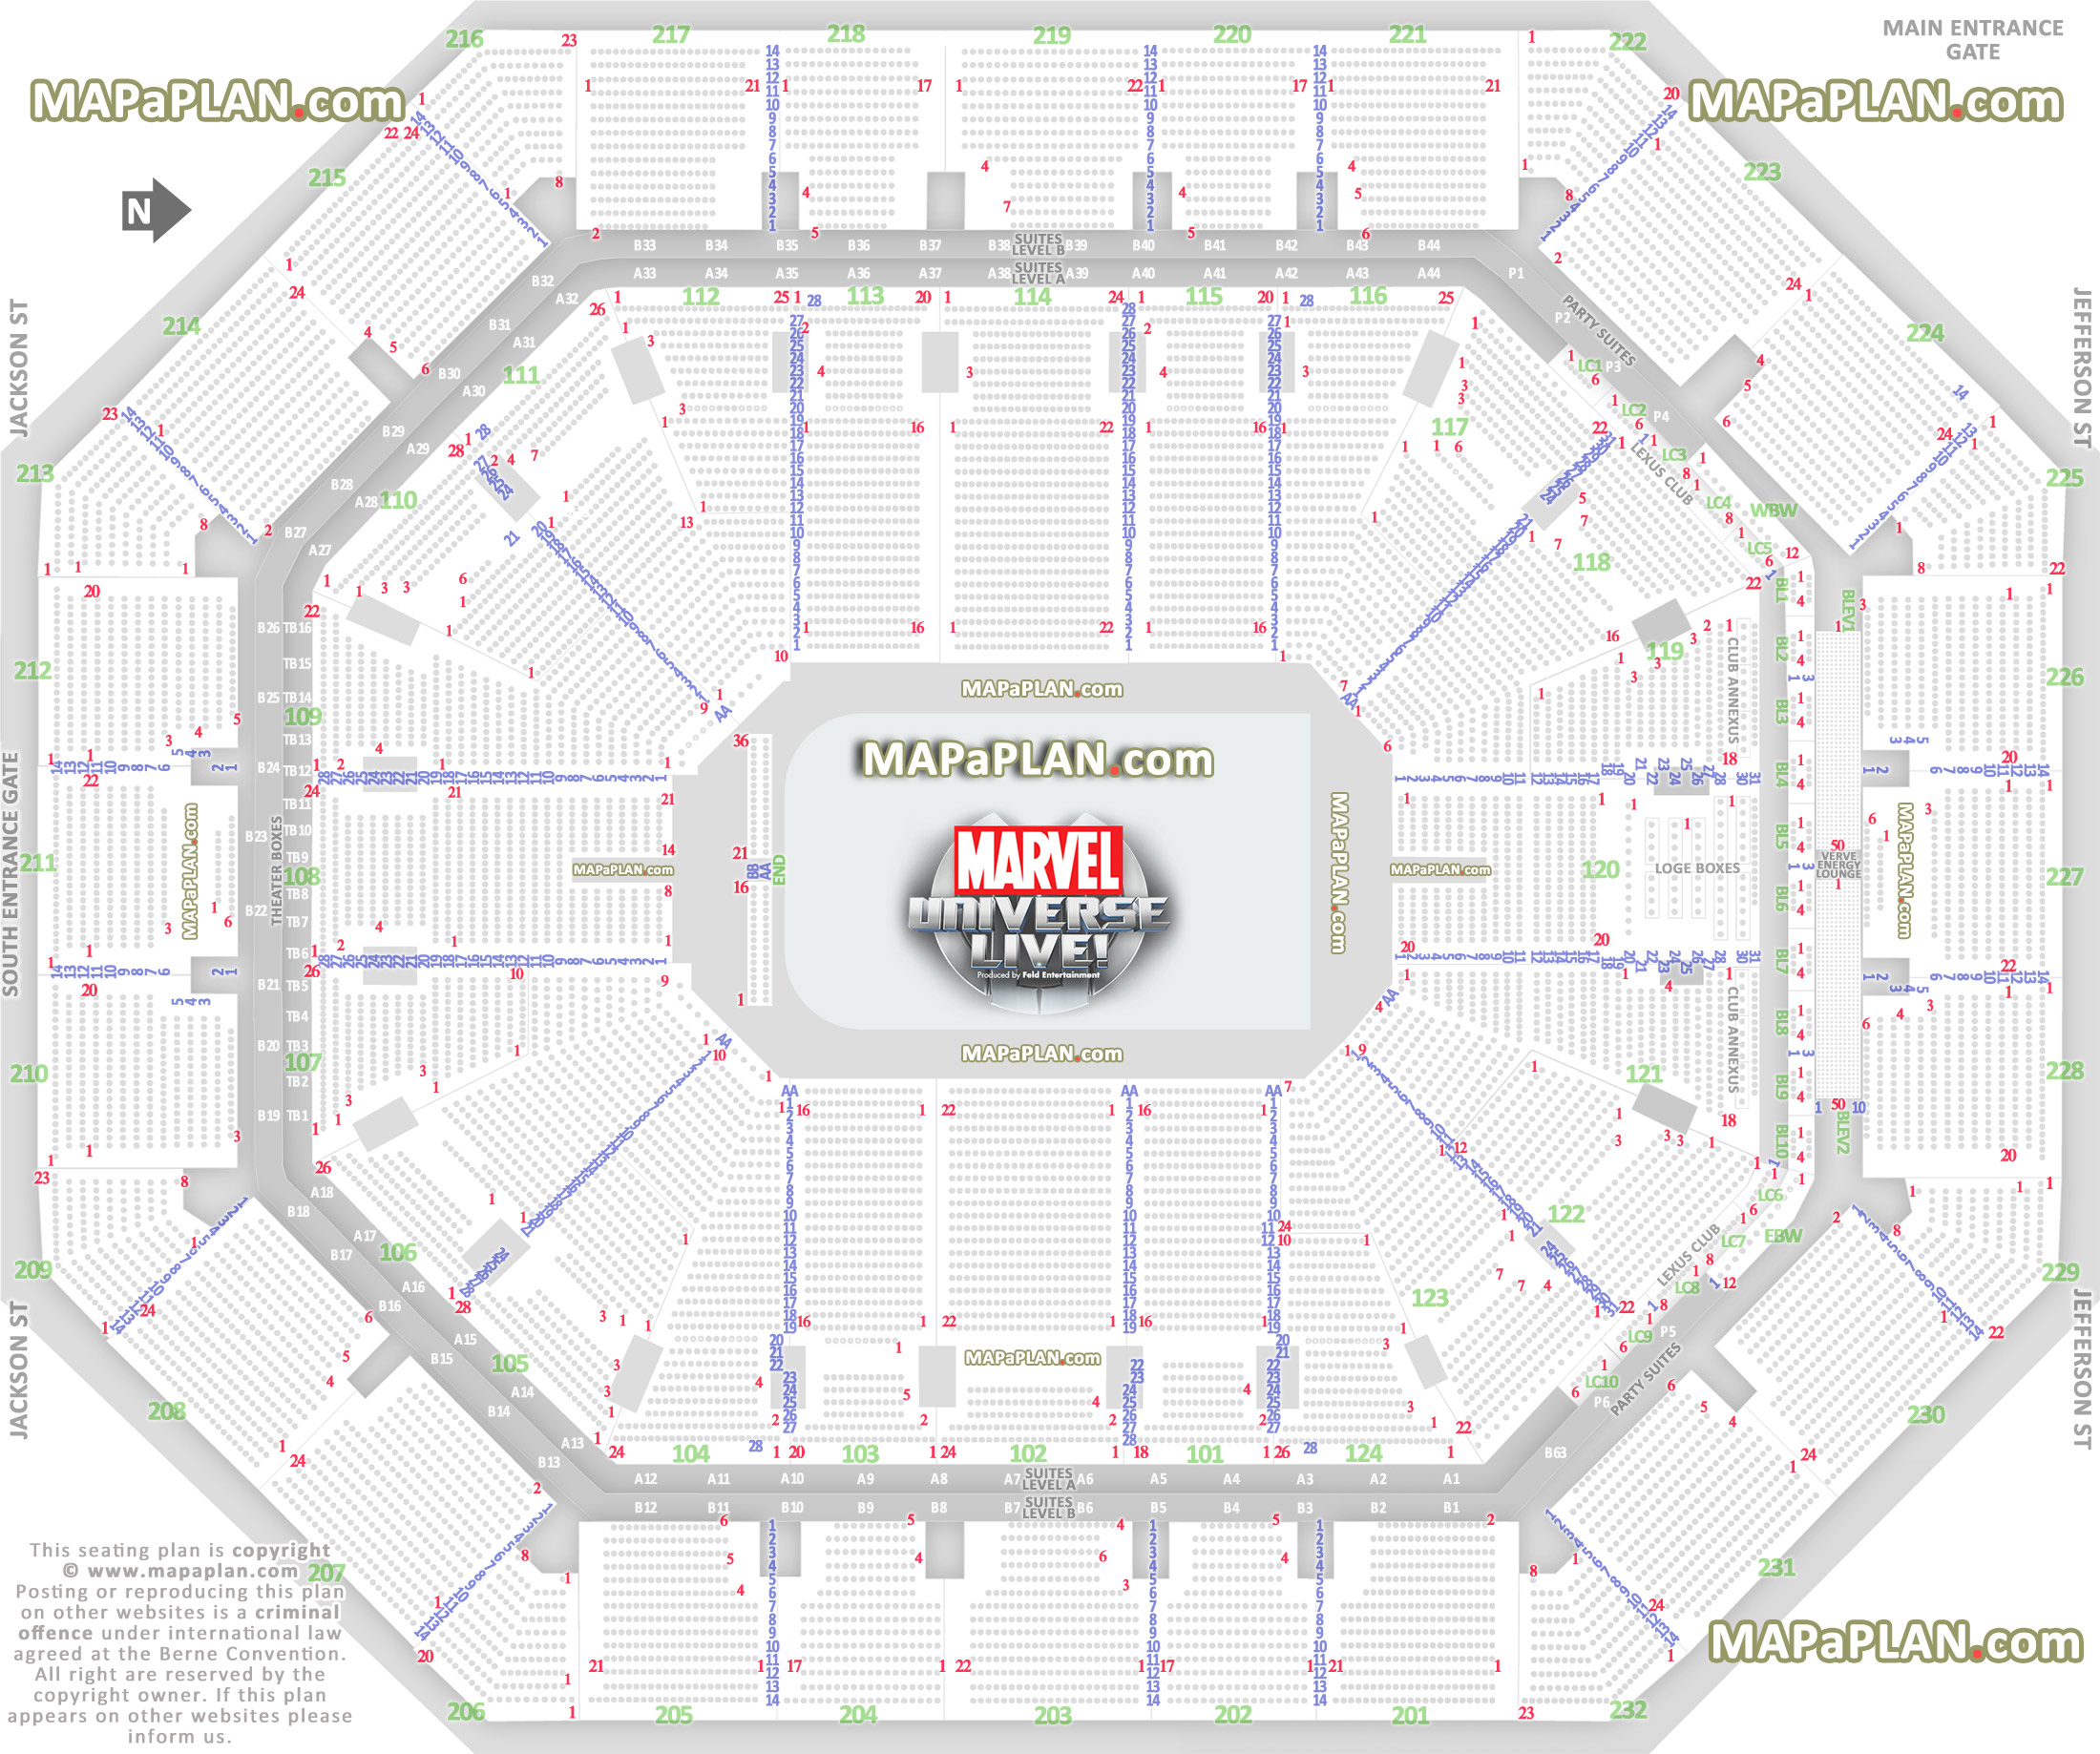 marvel universe live new show interactive balcony best seat selection arrangement review diagram sro standing room only area verve energy lounge Phoenix Talking Stick Resort Arena seating chart